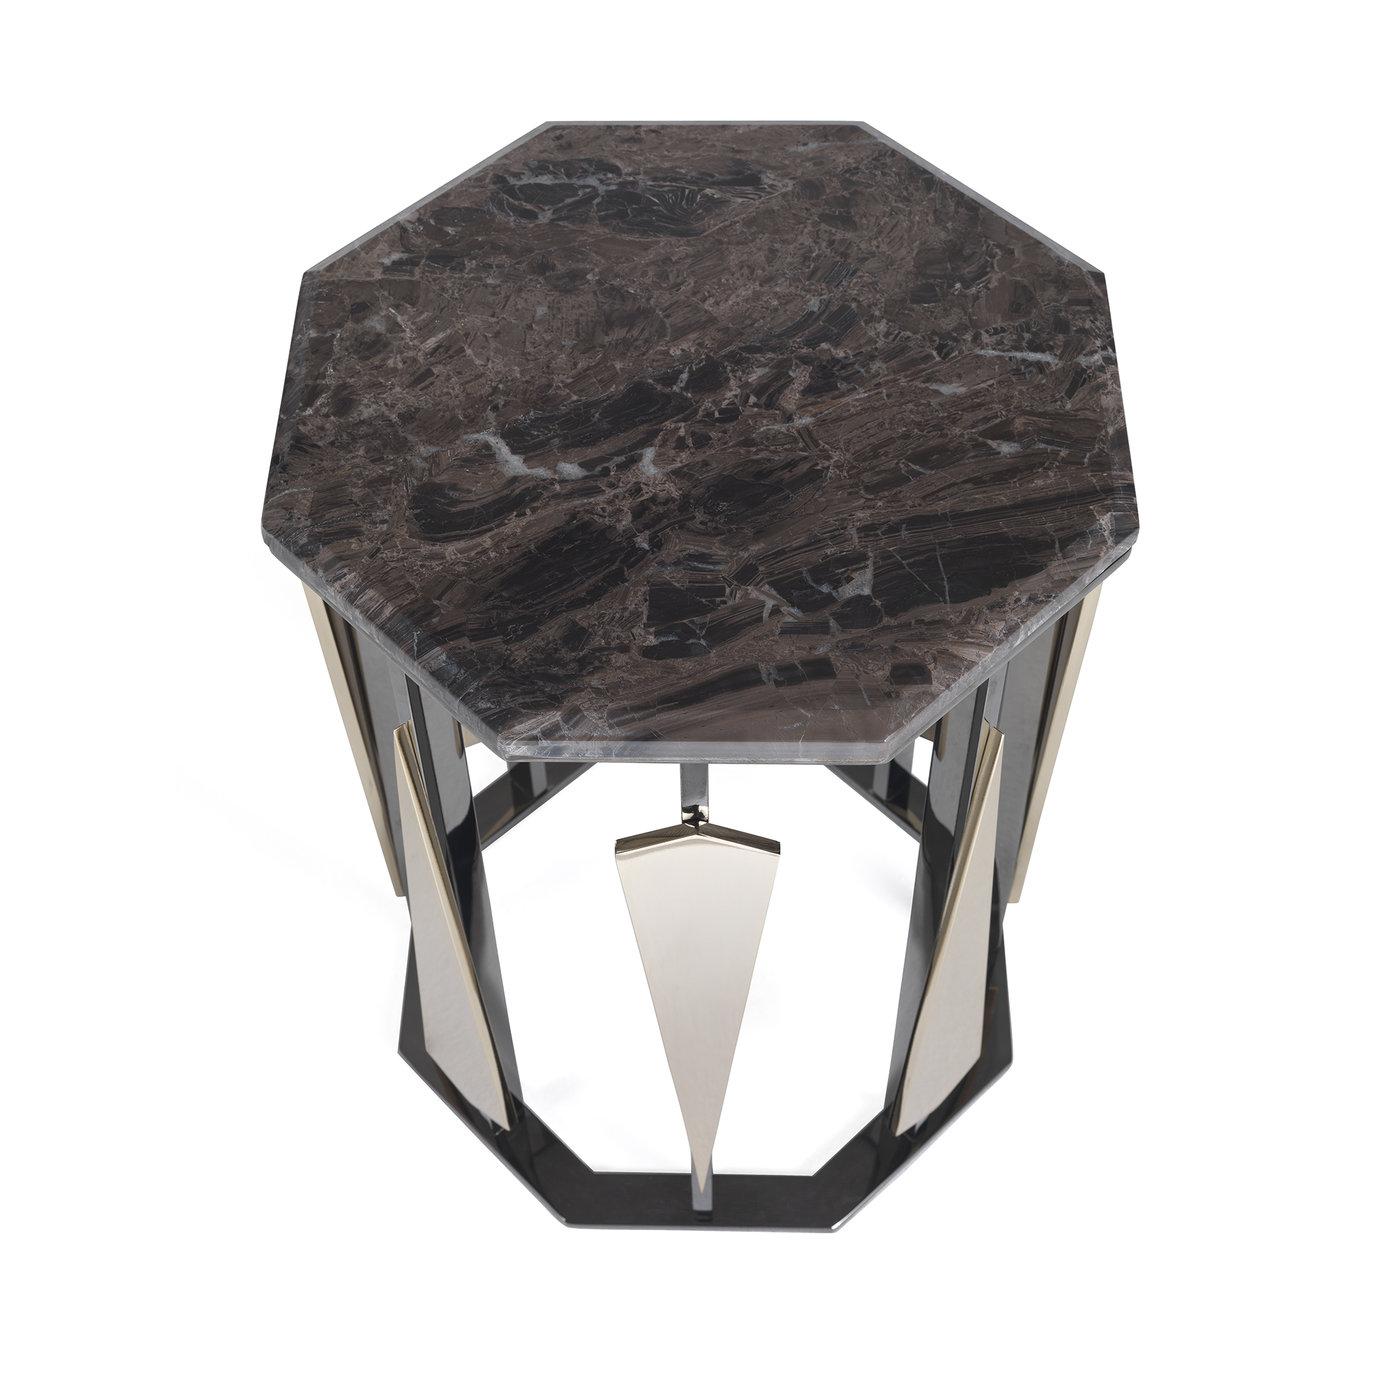 An exercise in creativity and innovative aesthetic sensibility, this sophisticated side table is a dynamic and exceptional work of functional decor. The hexagonal Cappuccino marble top is supported by a brass open frame in a black nickel finish. The